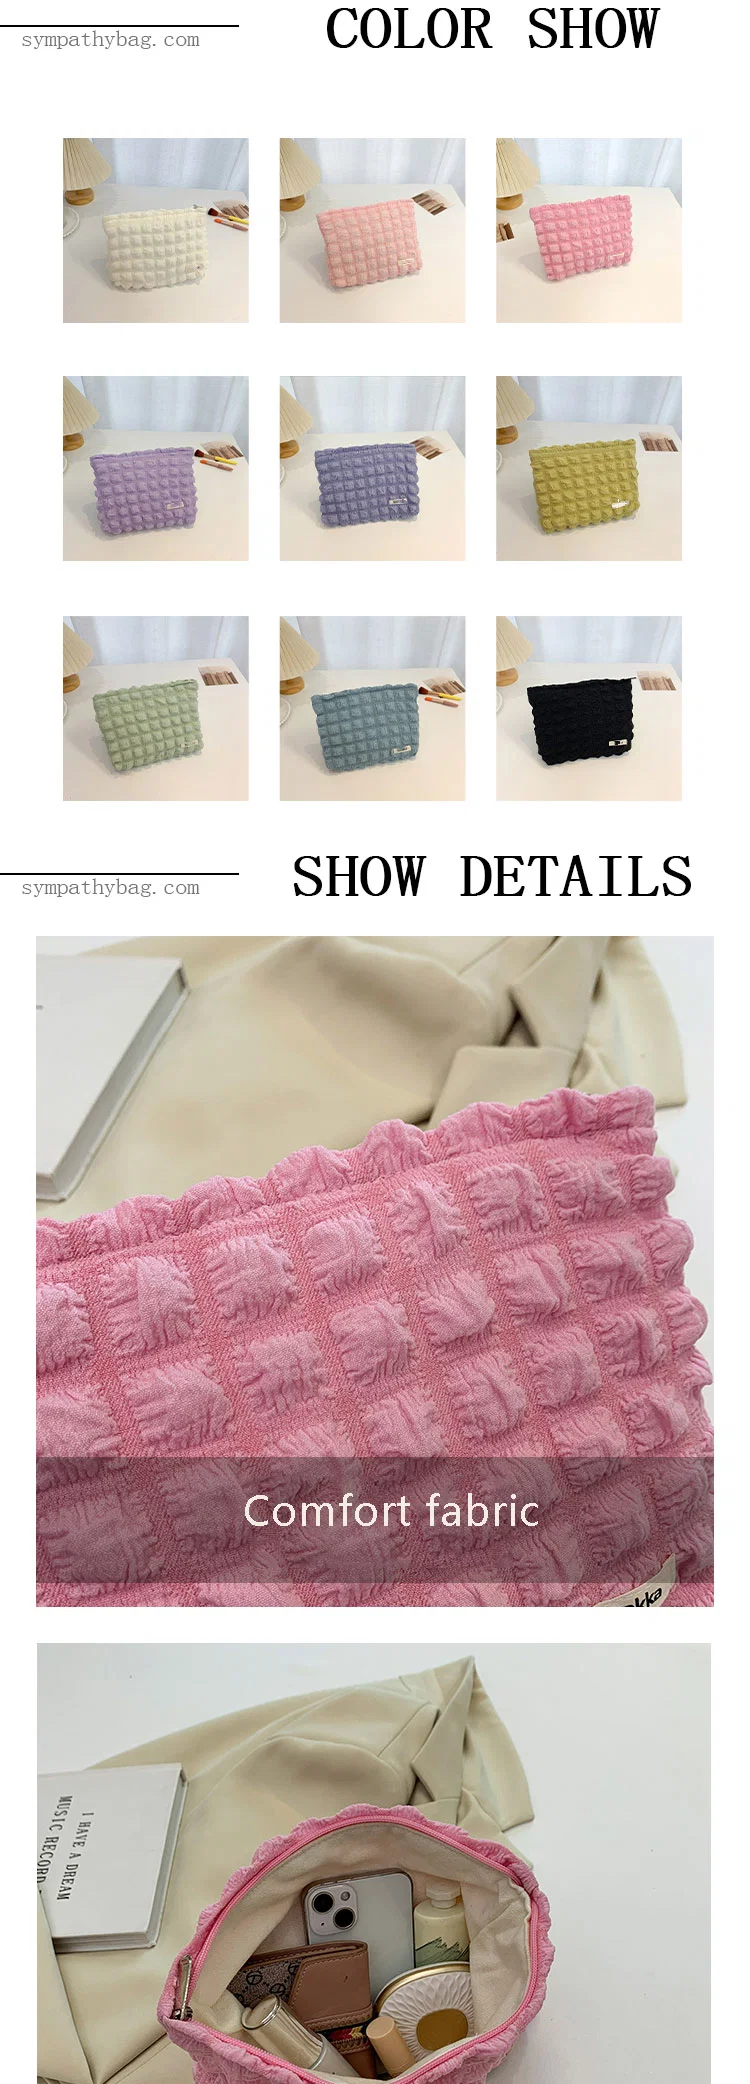 Fashion Soft Clouds Cosmetic Organizer Makeup Organizer Toiletry Bag Zipper Pouch for Gift